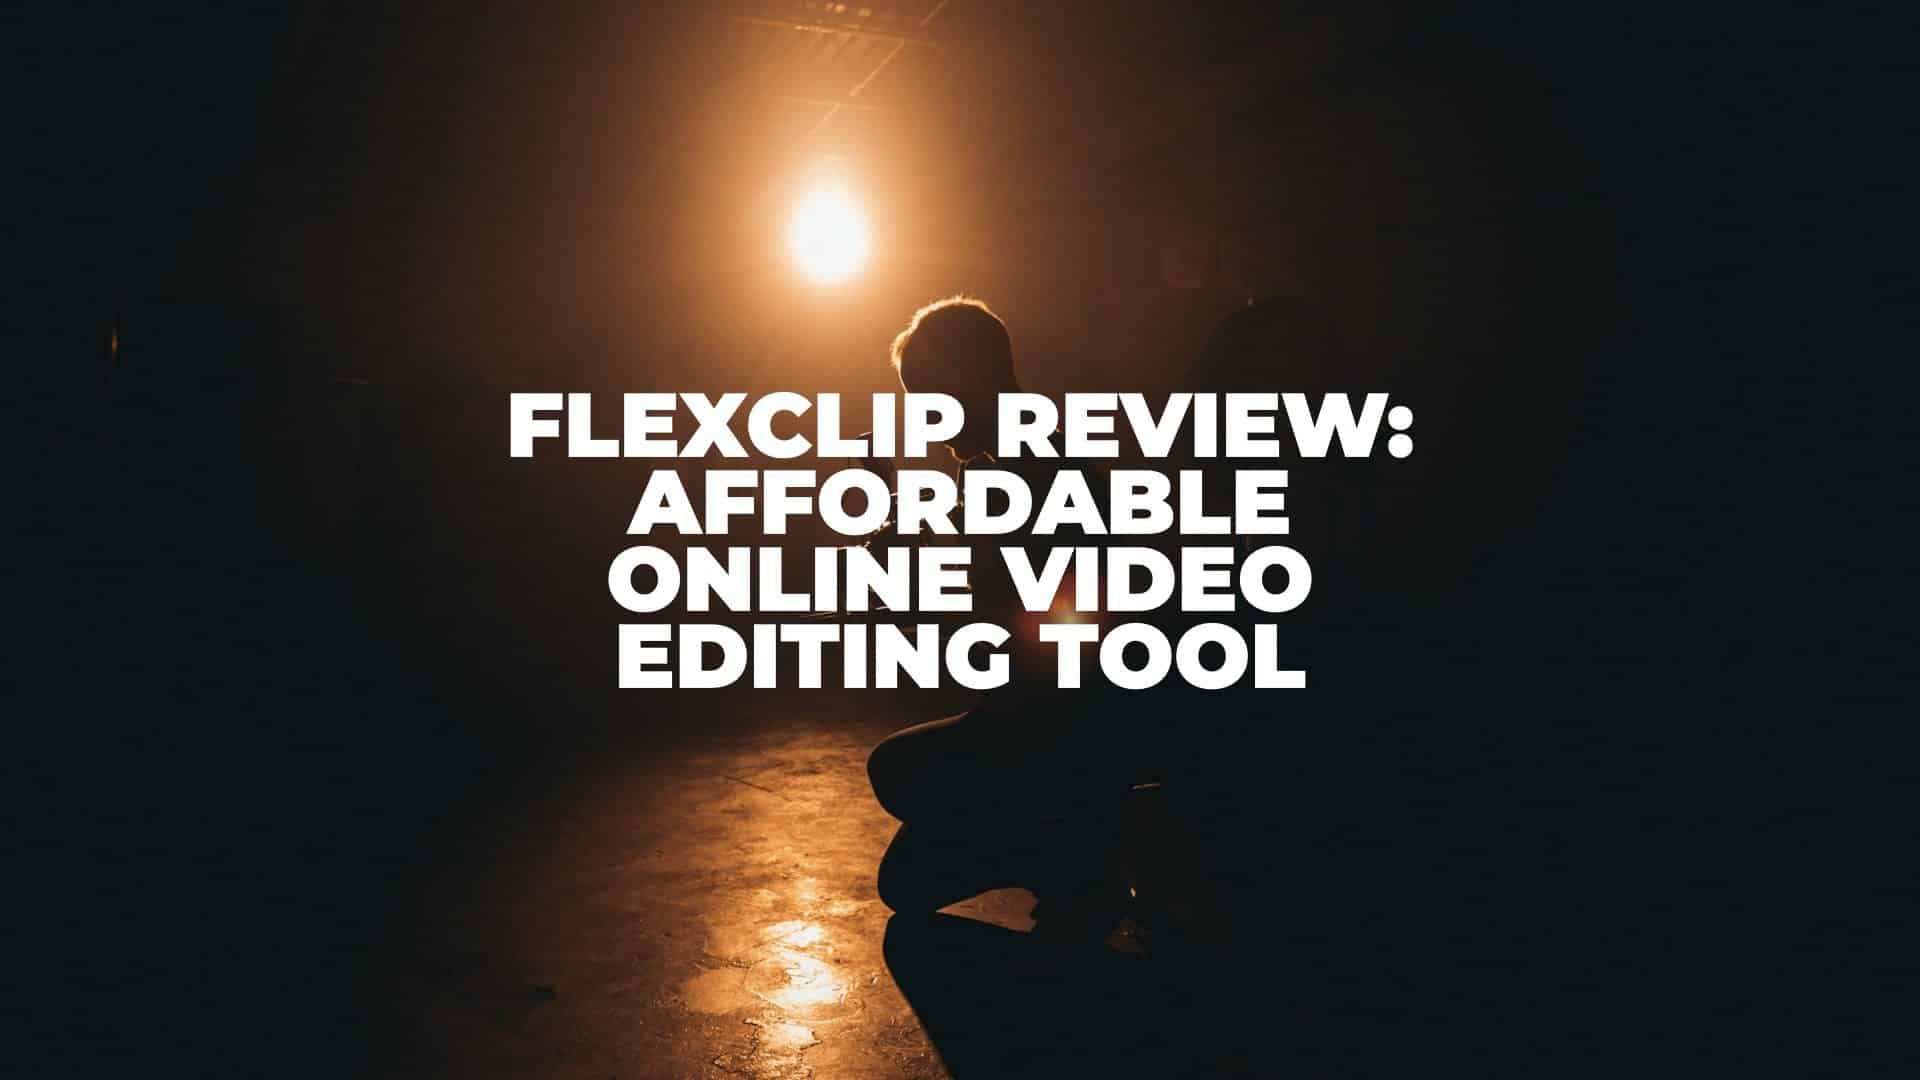 FlexClip Review - Featured Image